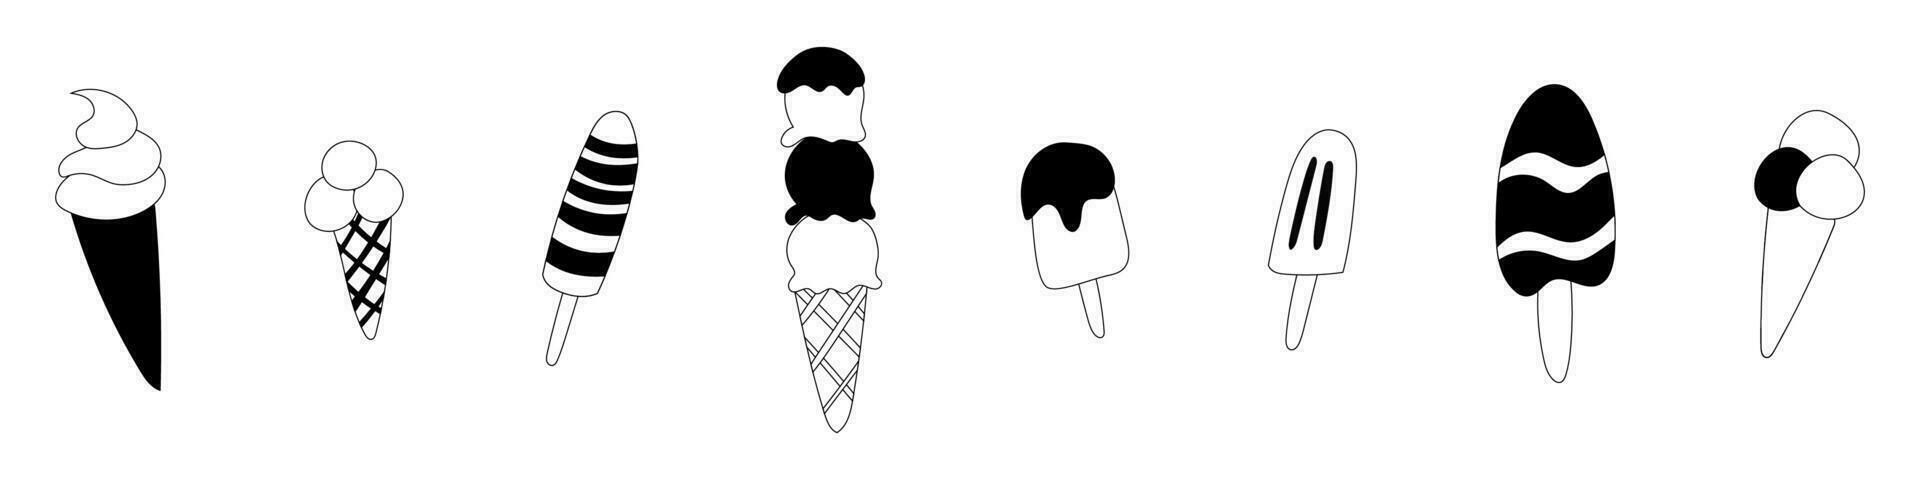 Vector illustration of a collection of ice cream on a stick and in a waffle cone. Black and white. A doodle style ice cream set is isolated on a white background.